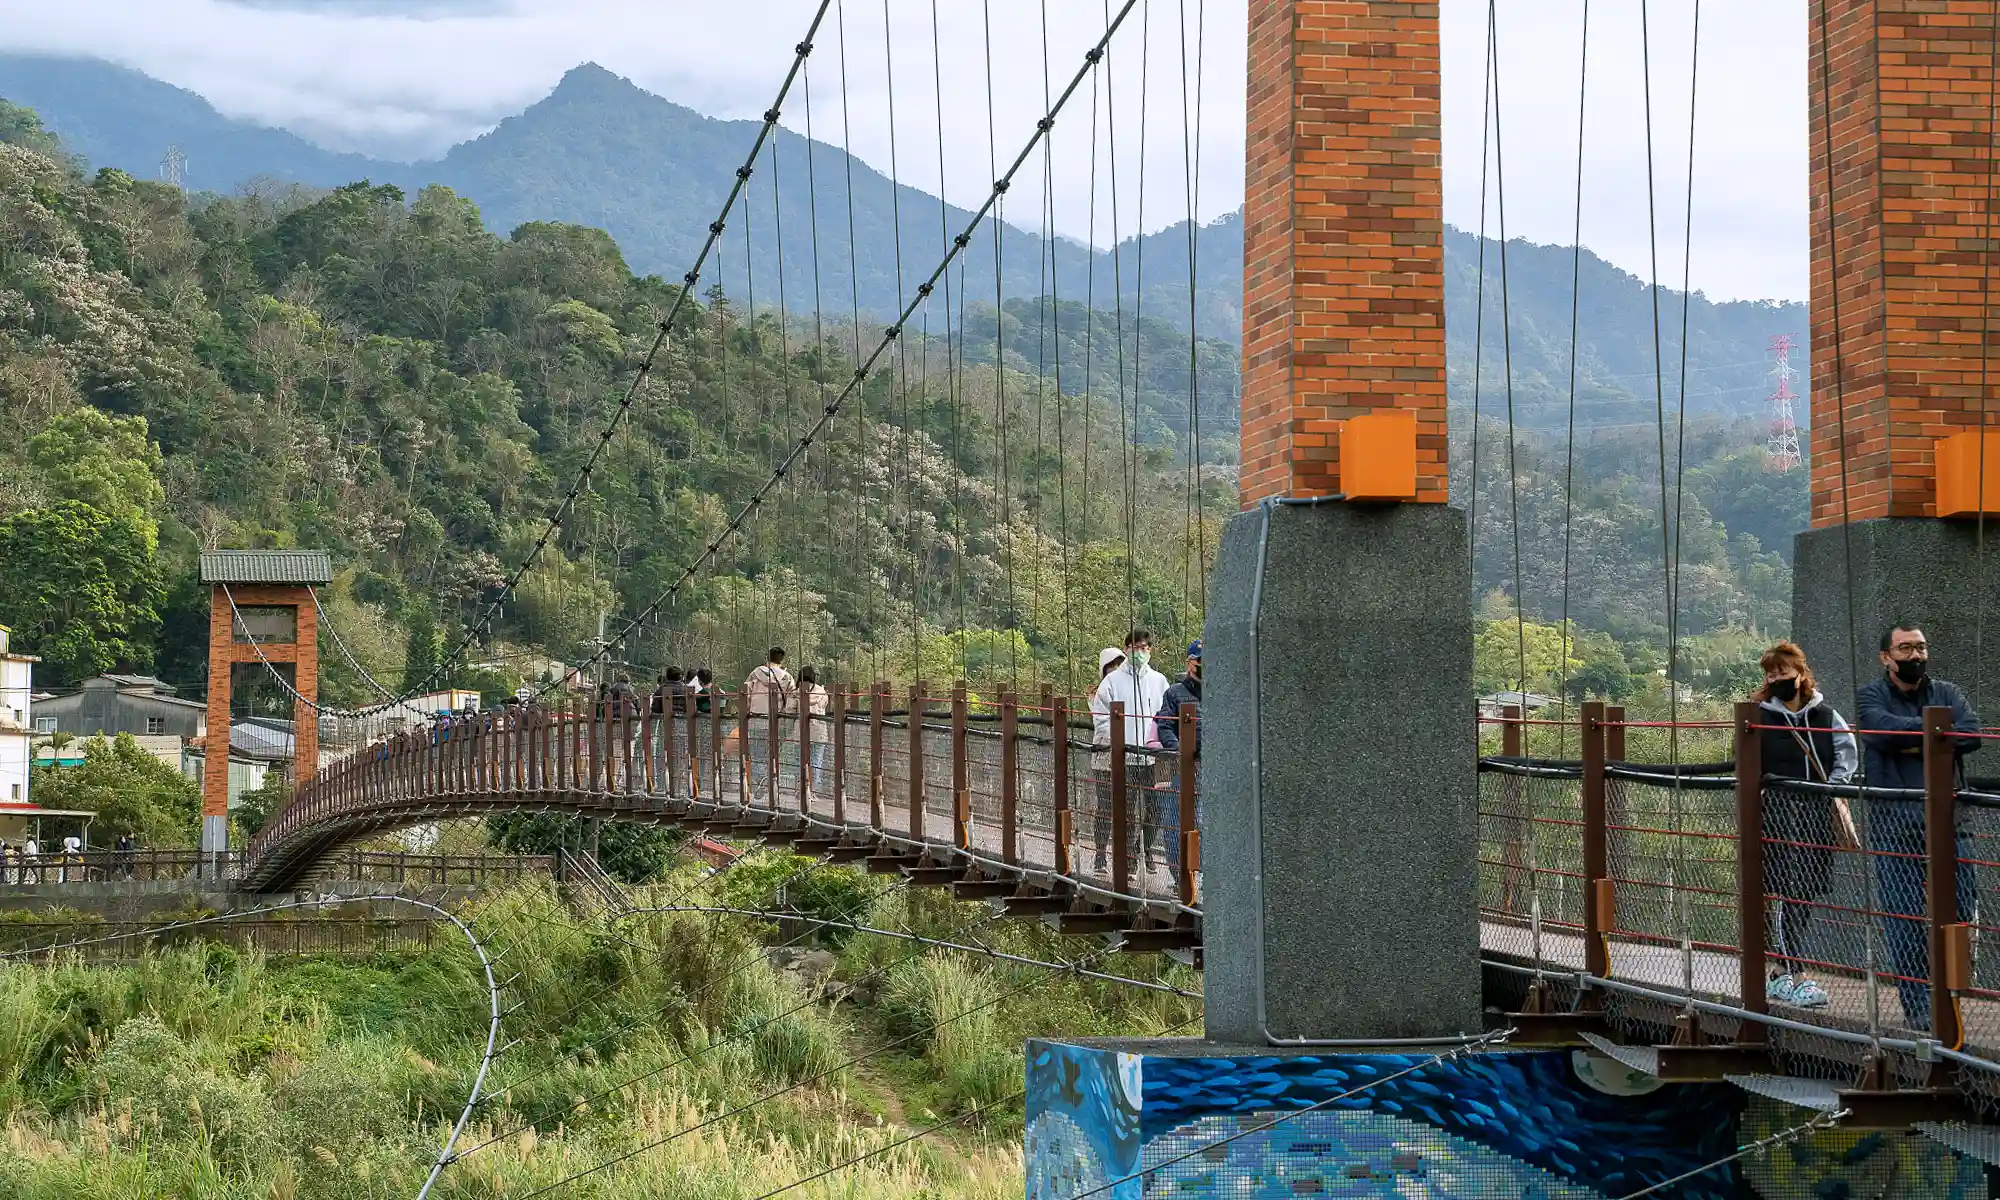 People walk over the Kangji Suspension Bridge; buildings and mountains can be seen in the distance.